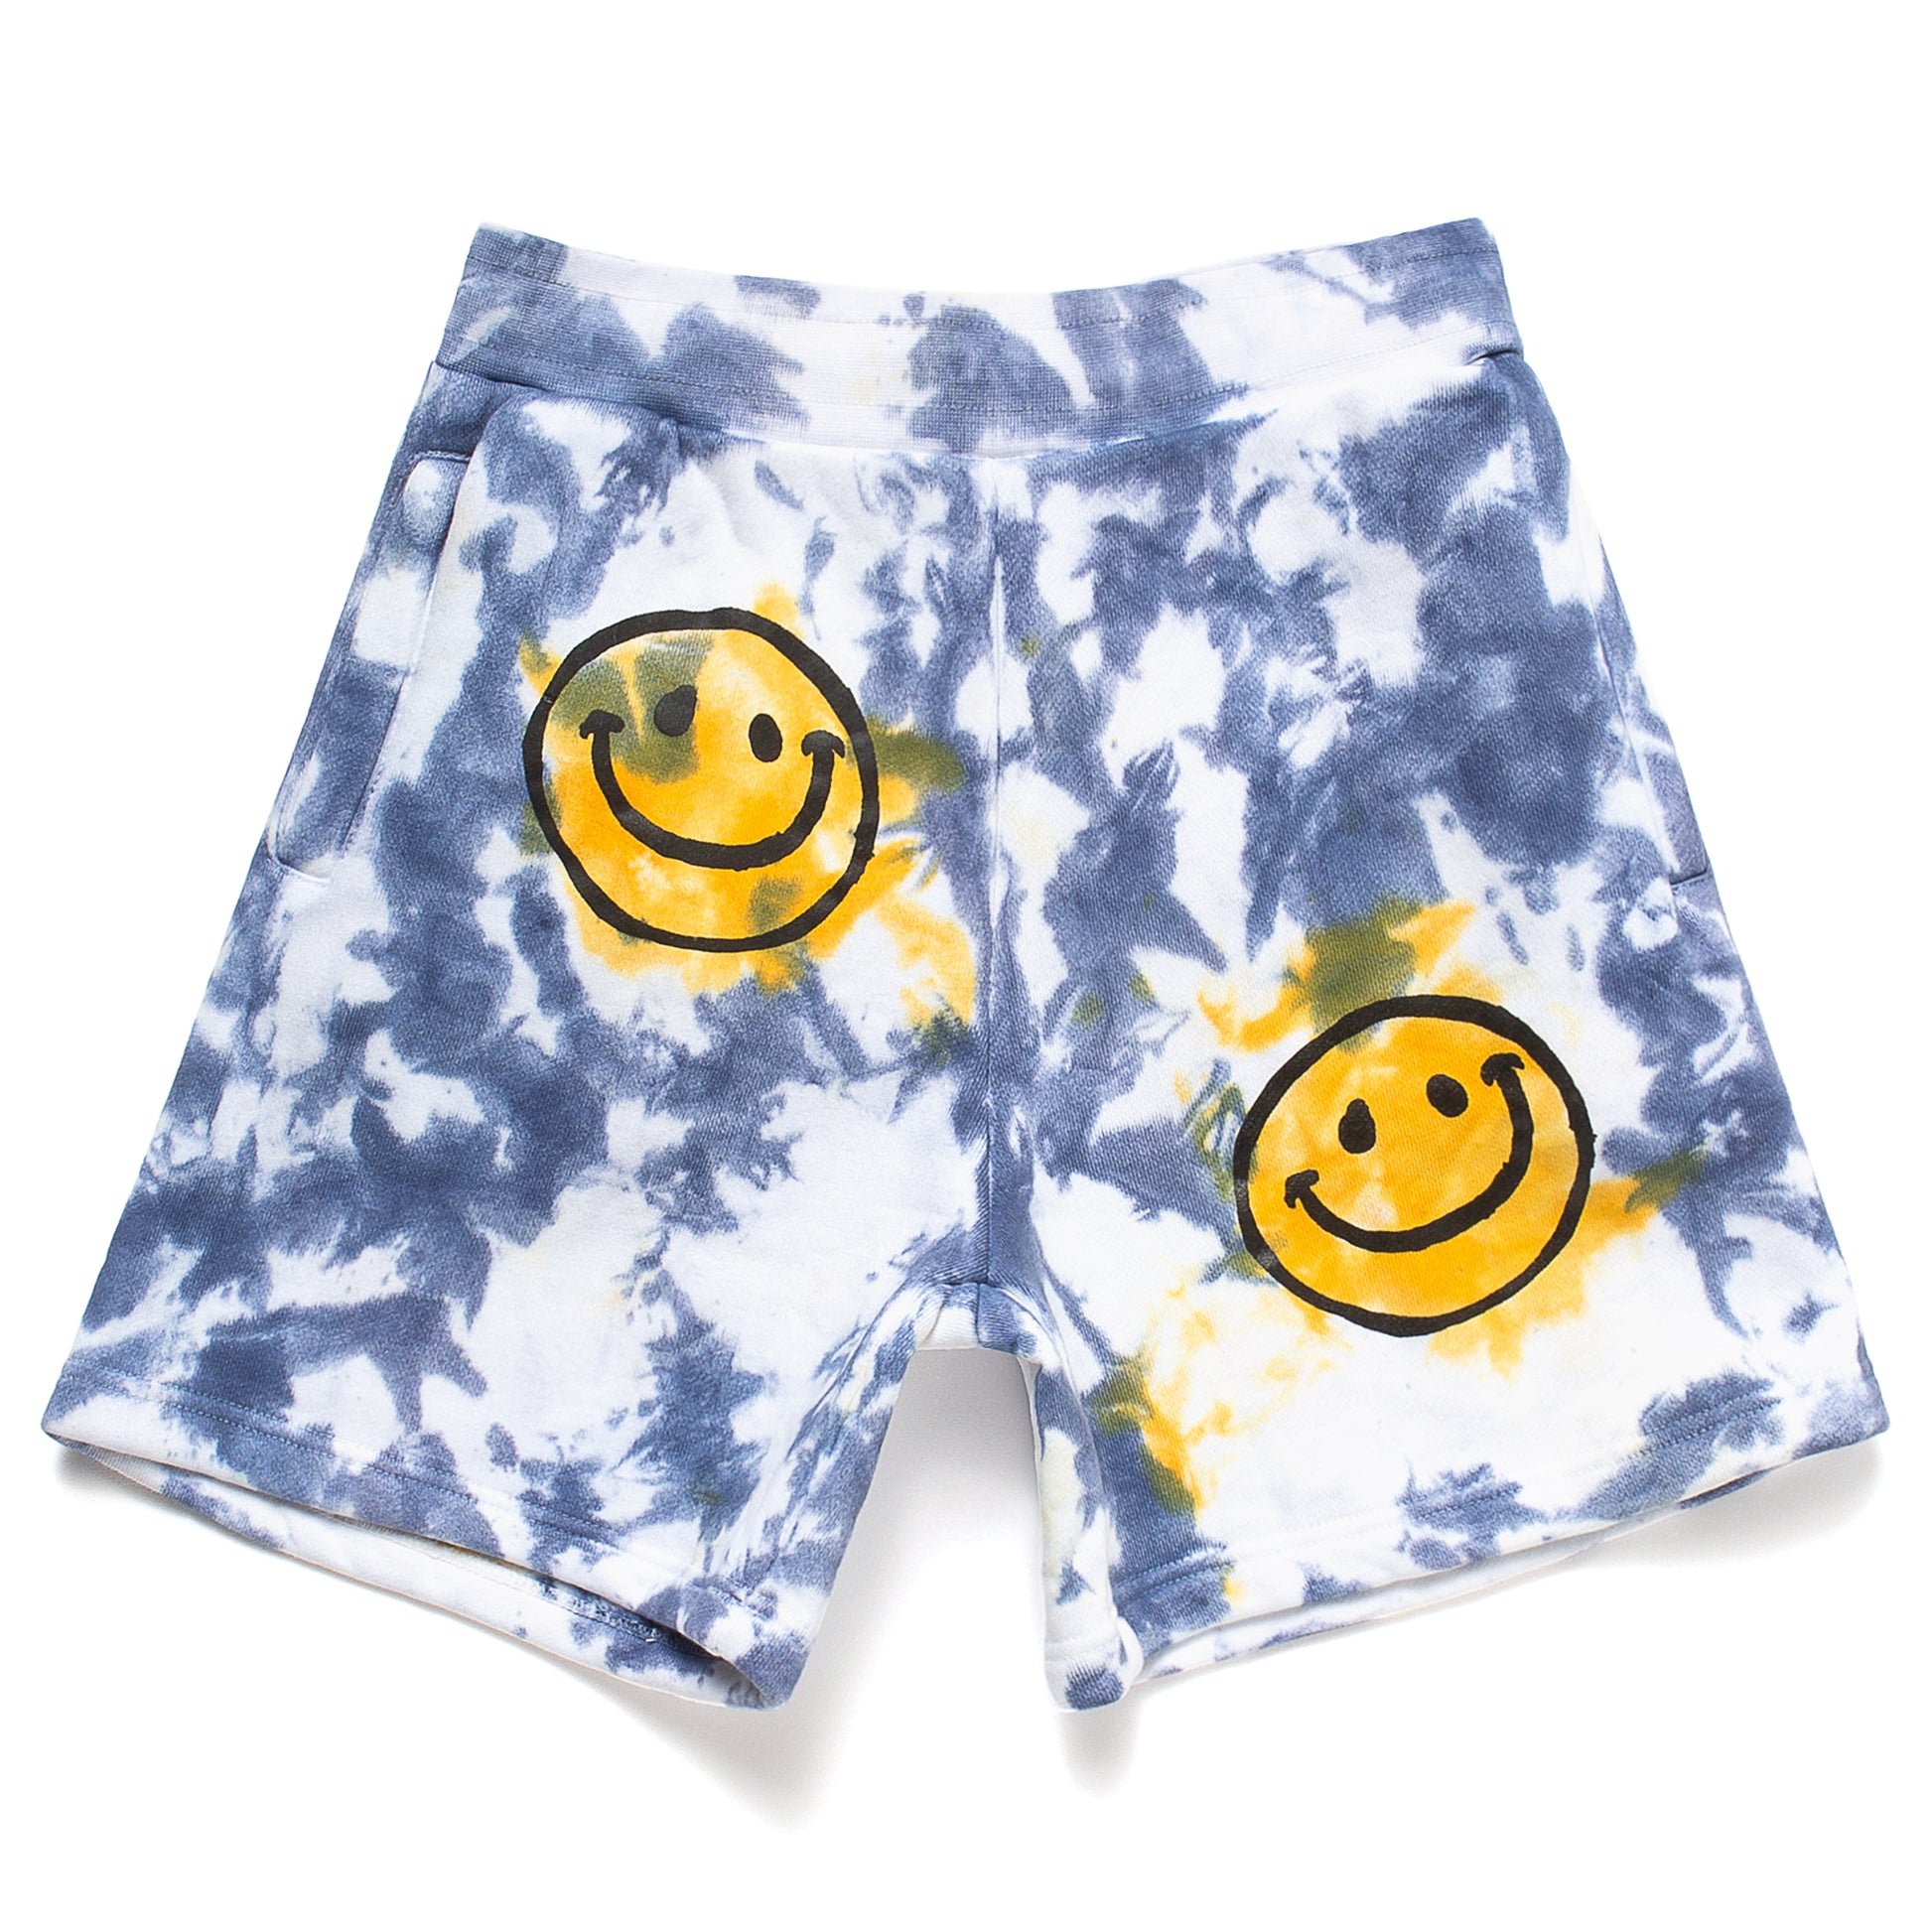 MARKET clothing brand SMILEY SUN DYE SWEATSHORTS. Find more graphic tees, sweatpants, shorts and more bottoms at MarketStudios.com. Formally Chinatown Market. 